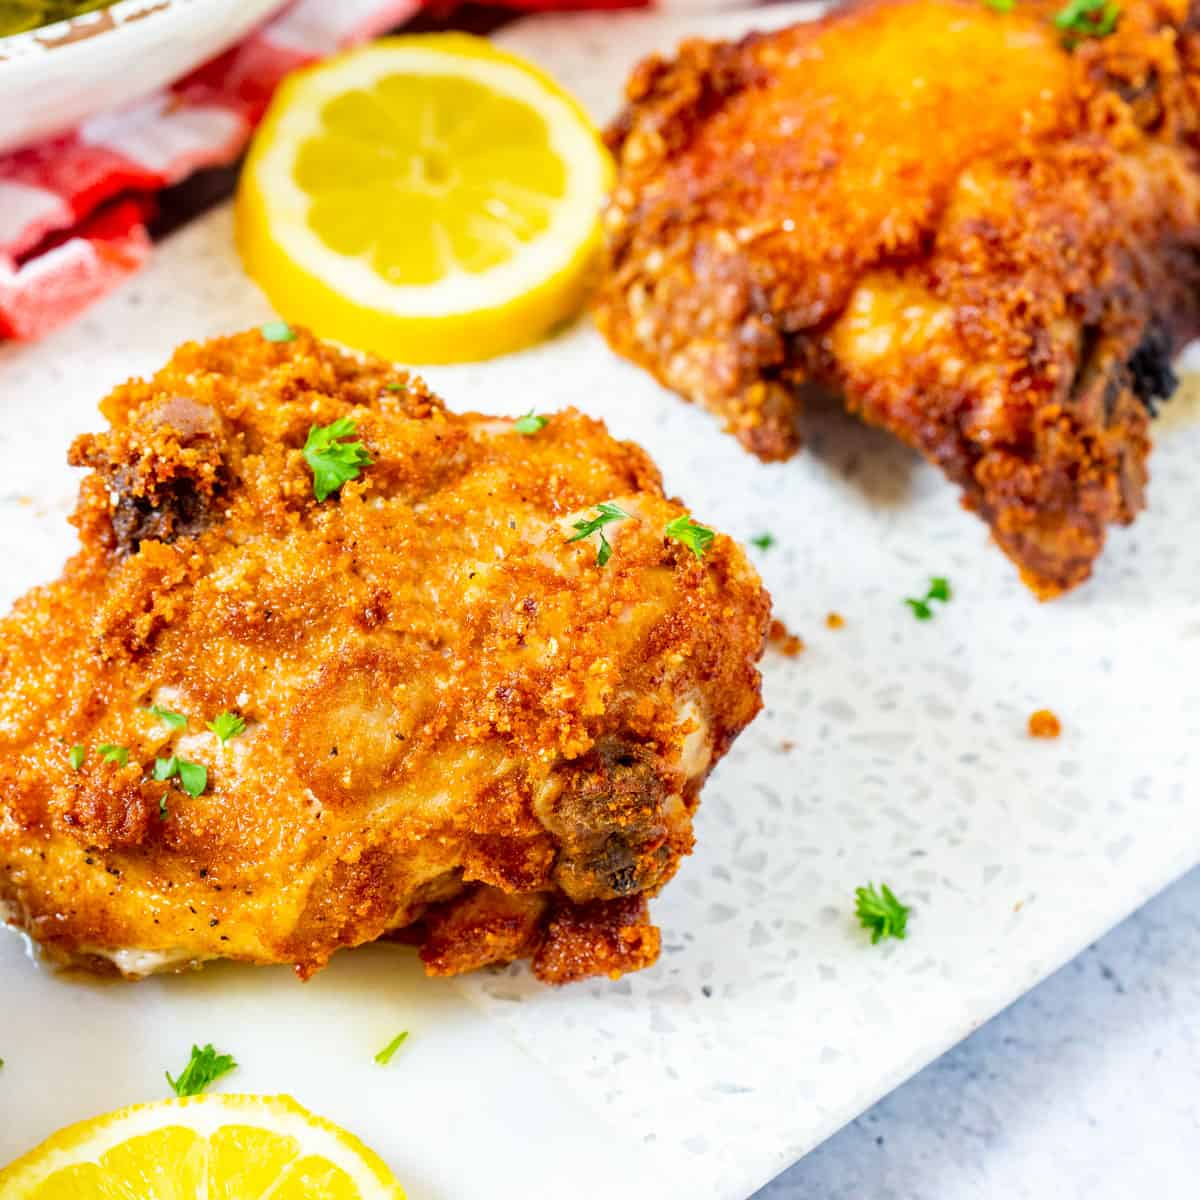 Keto Fried Chicken - Air Fry or Fry